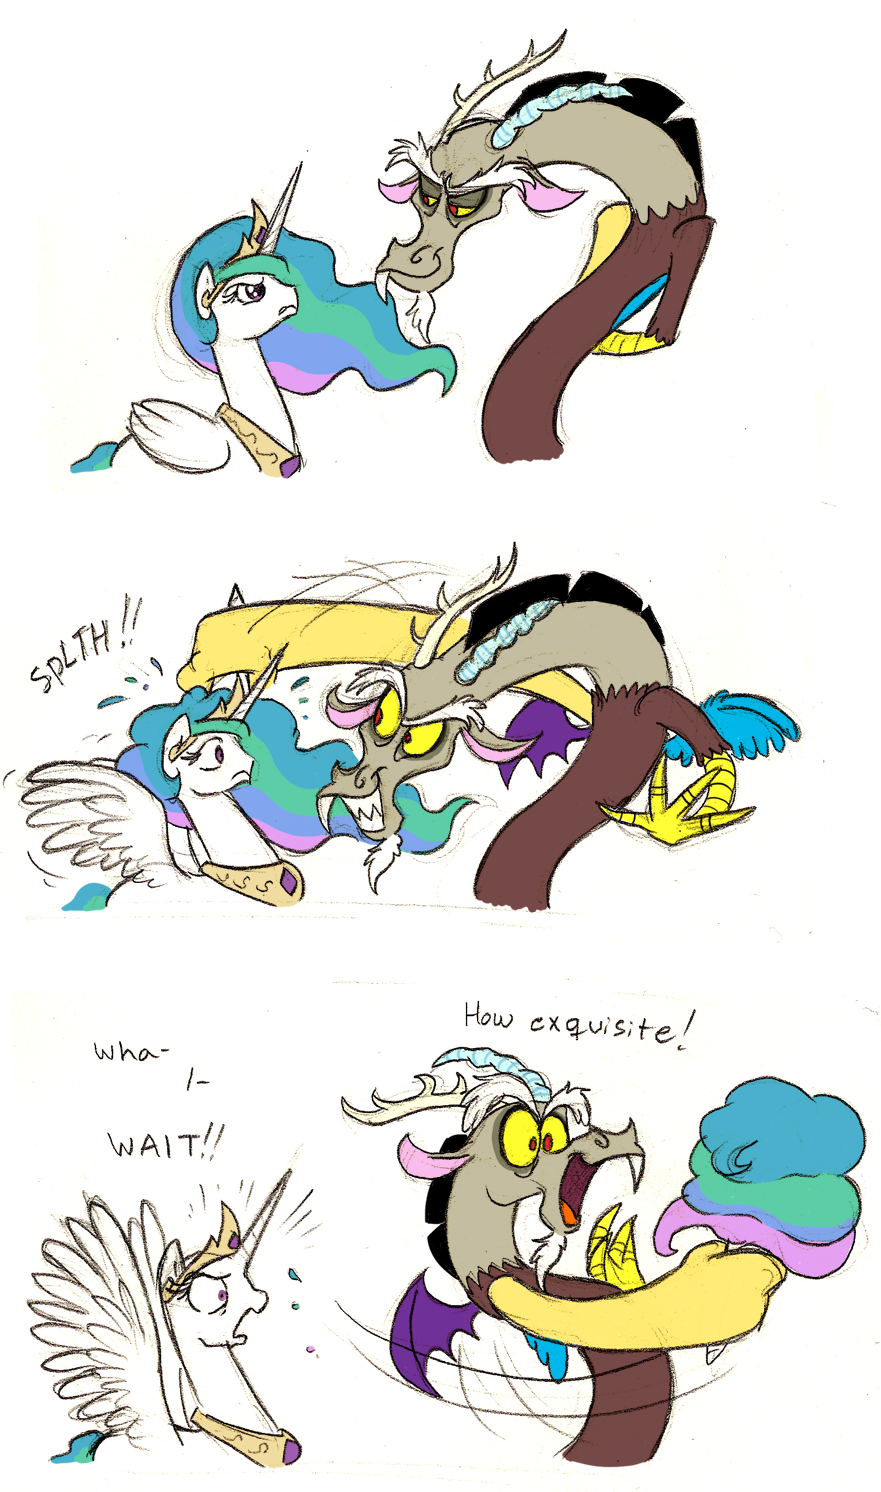 [Obrázek: discord_being_discord_by_mickeymonster-d4neld1.png]